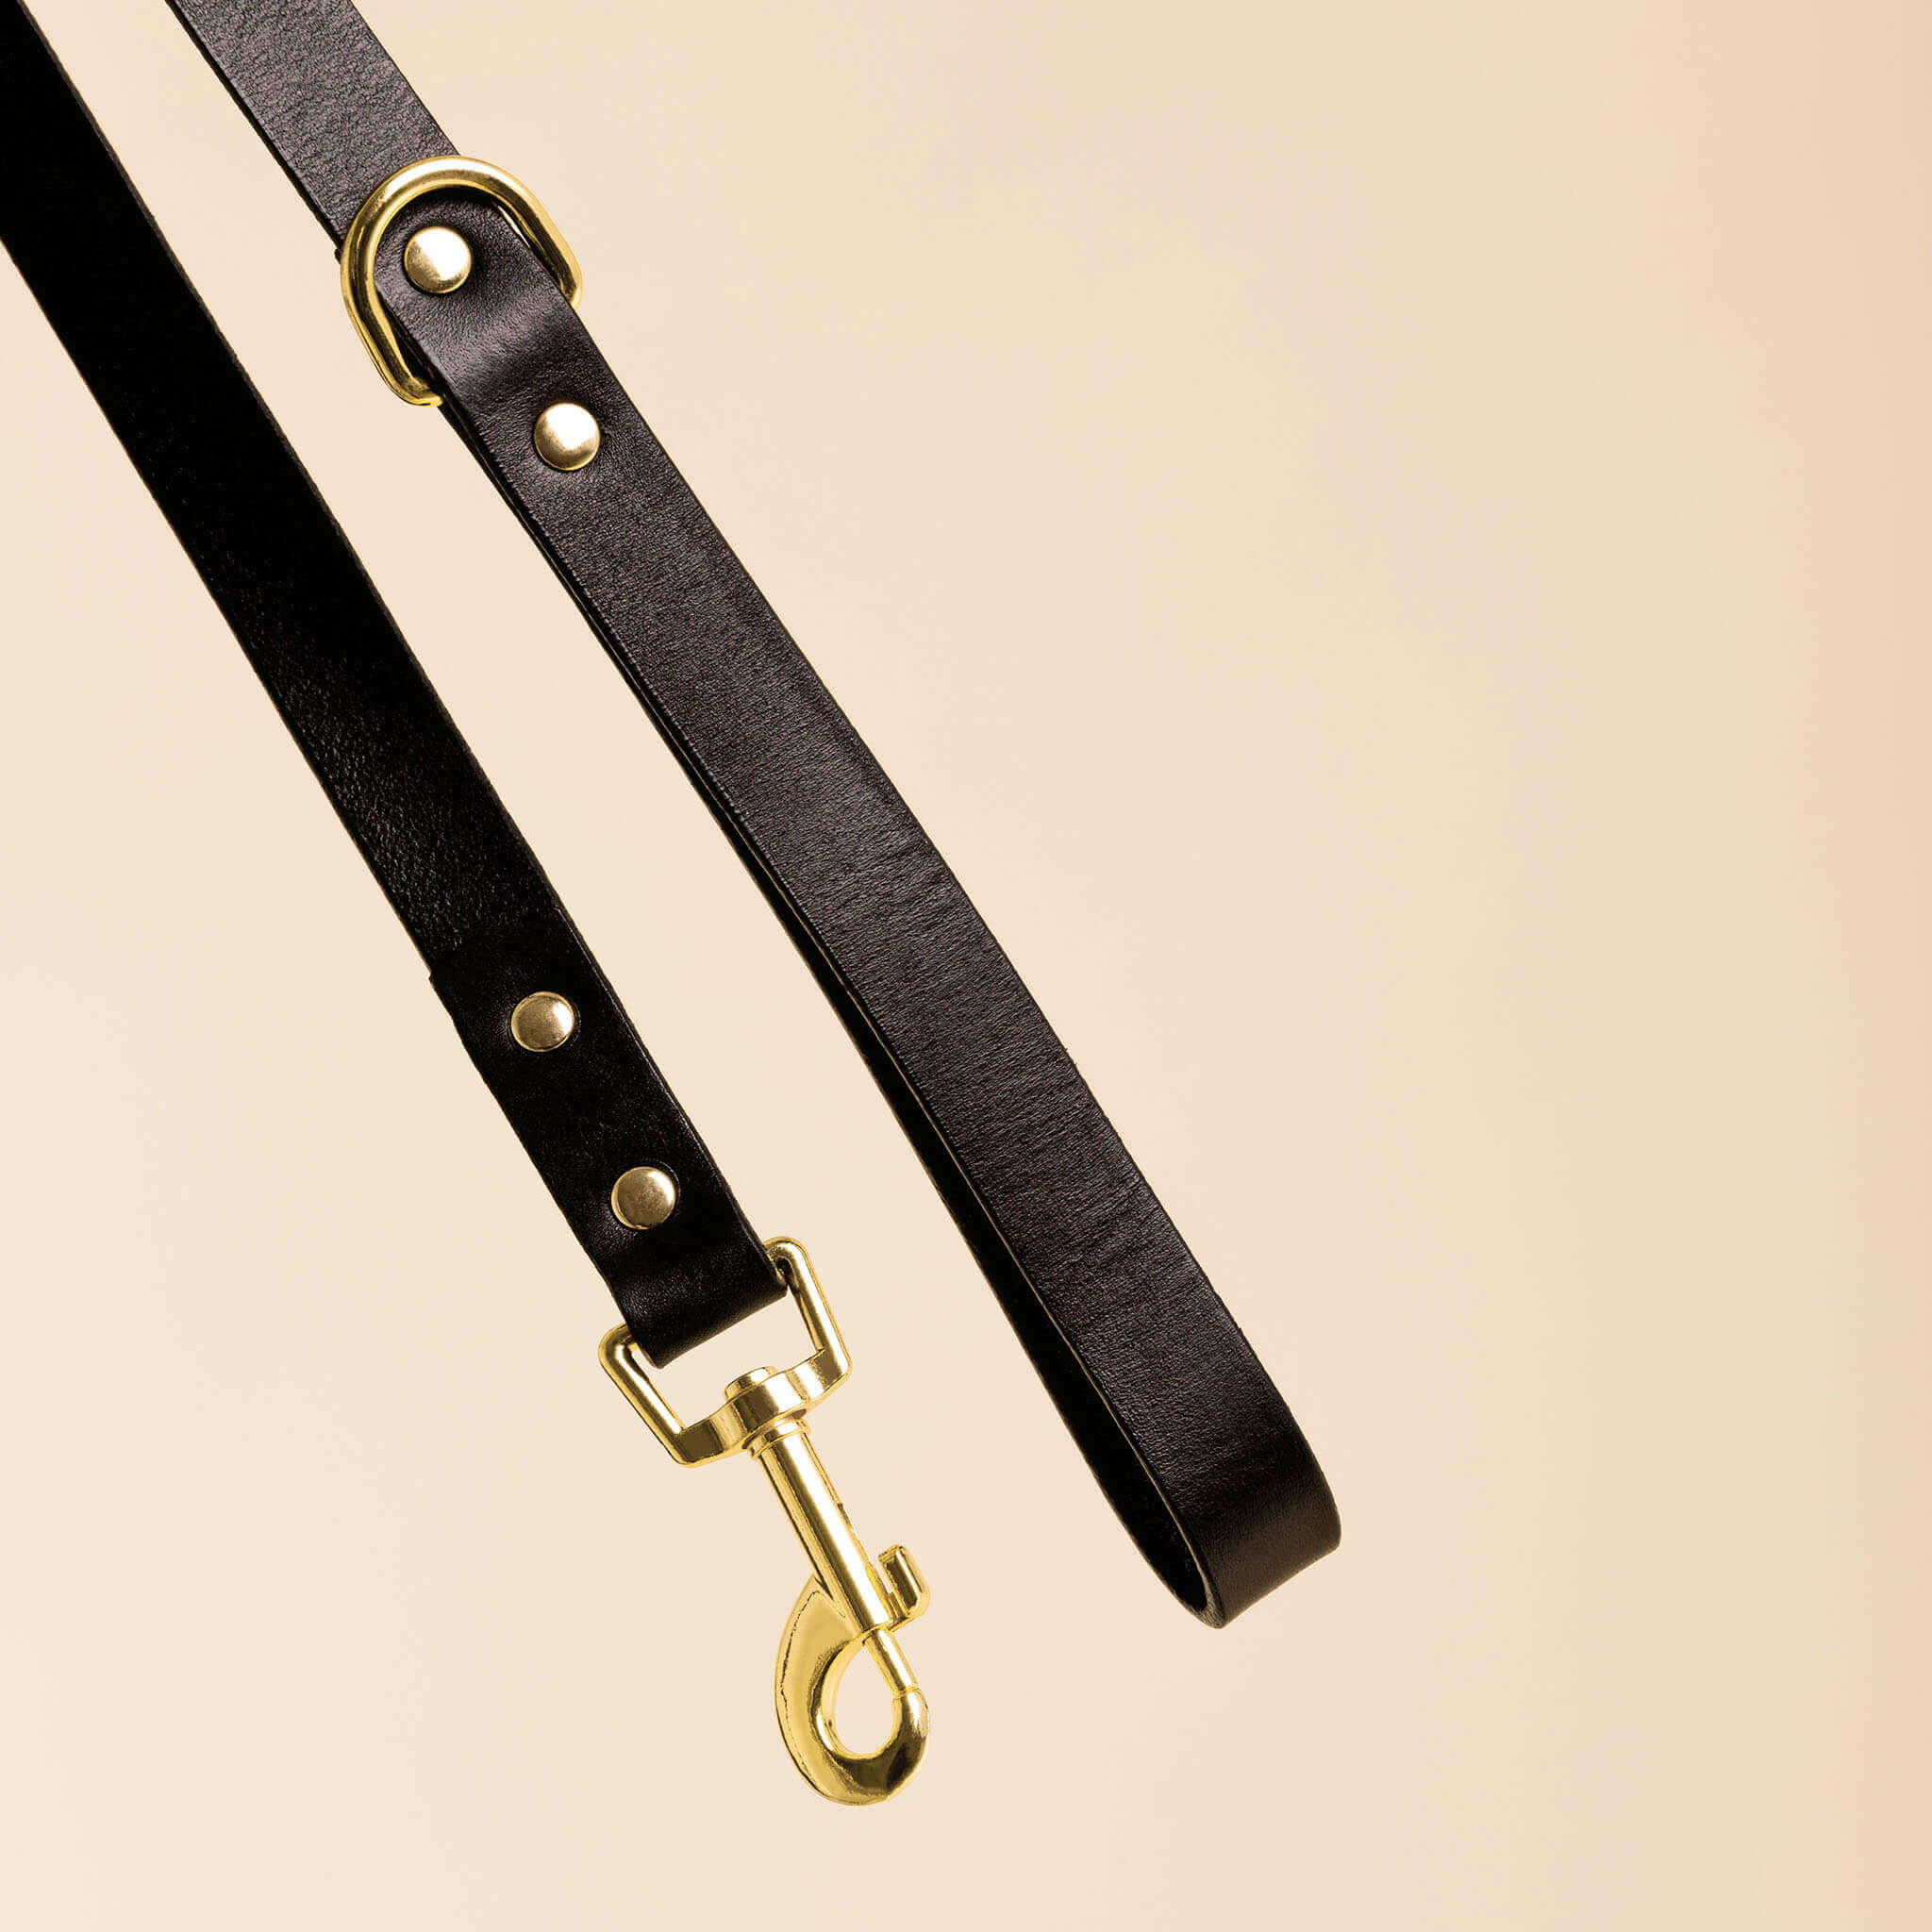 Luxury leather dog leash in sable.